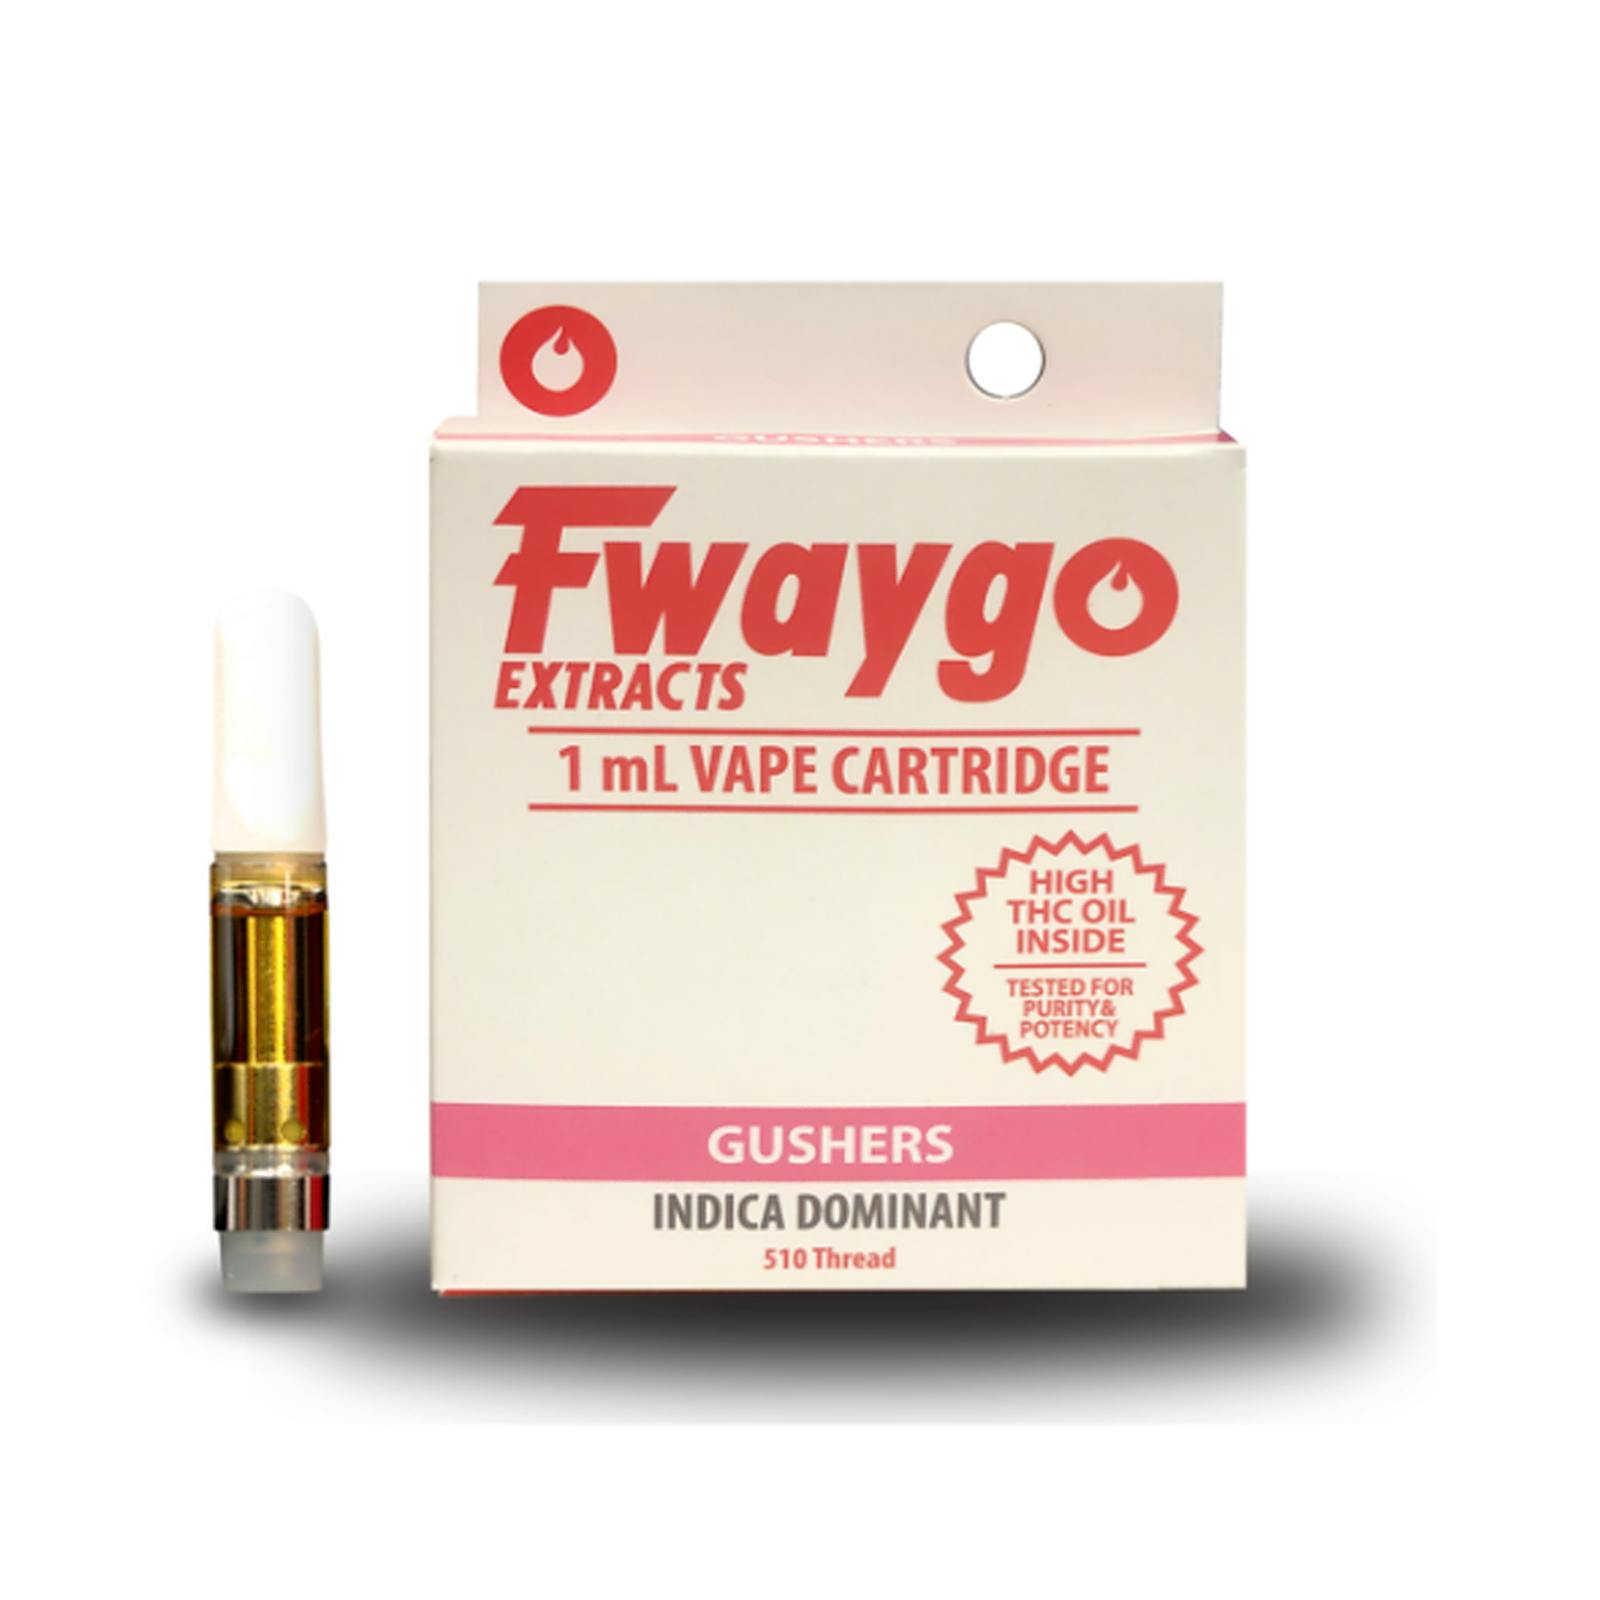 Fwaygo Extracts: Gushers Cartridge 1g | Leafly